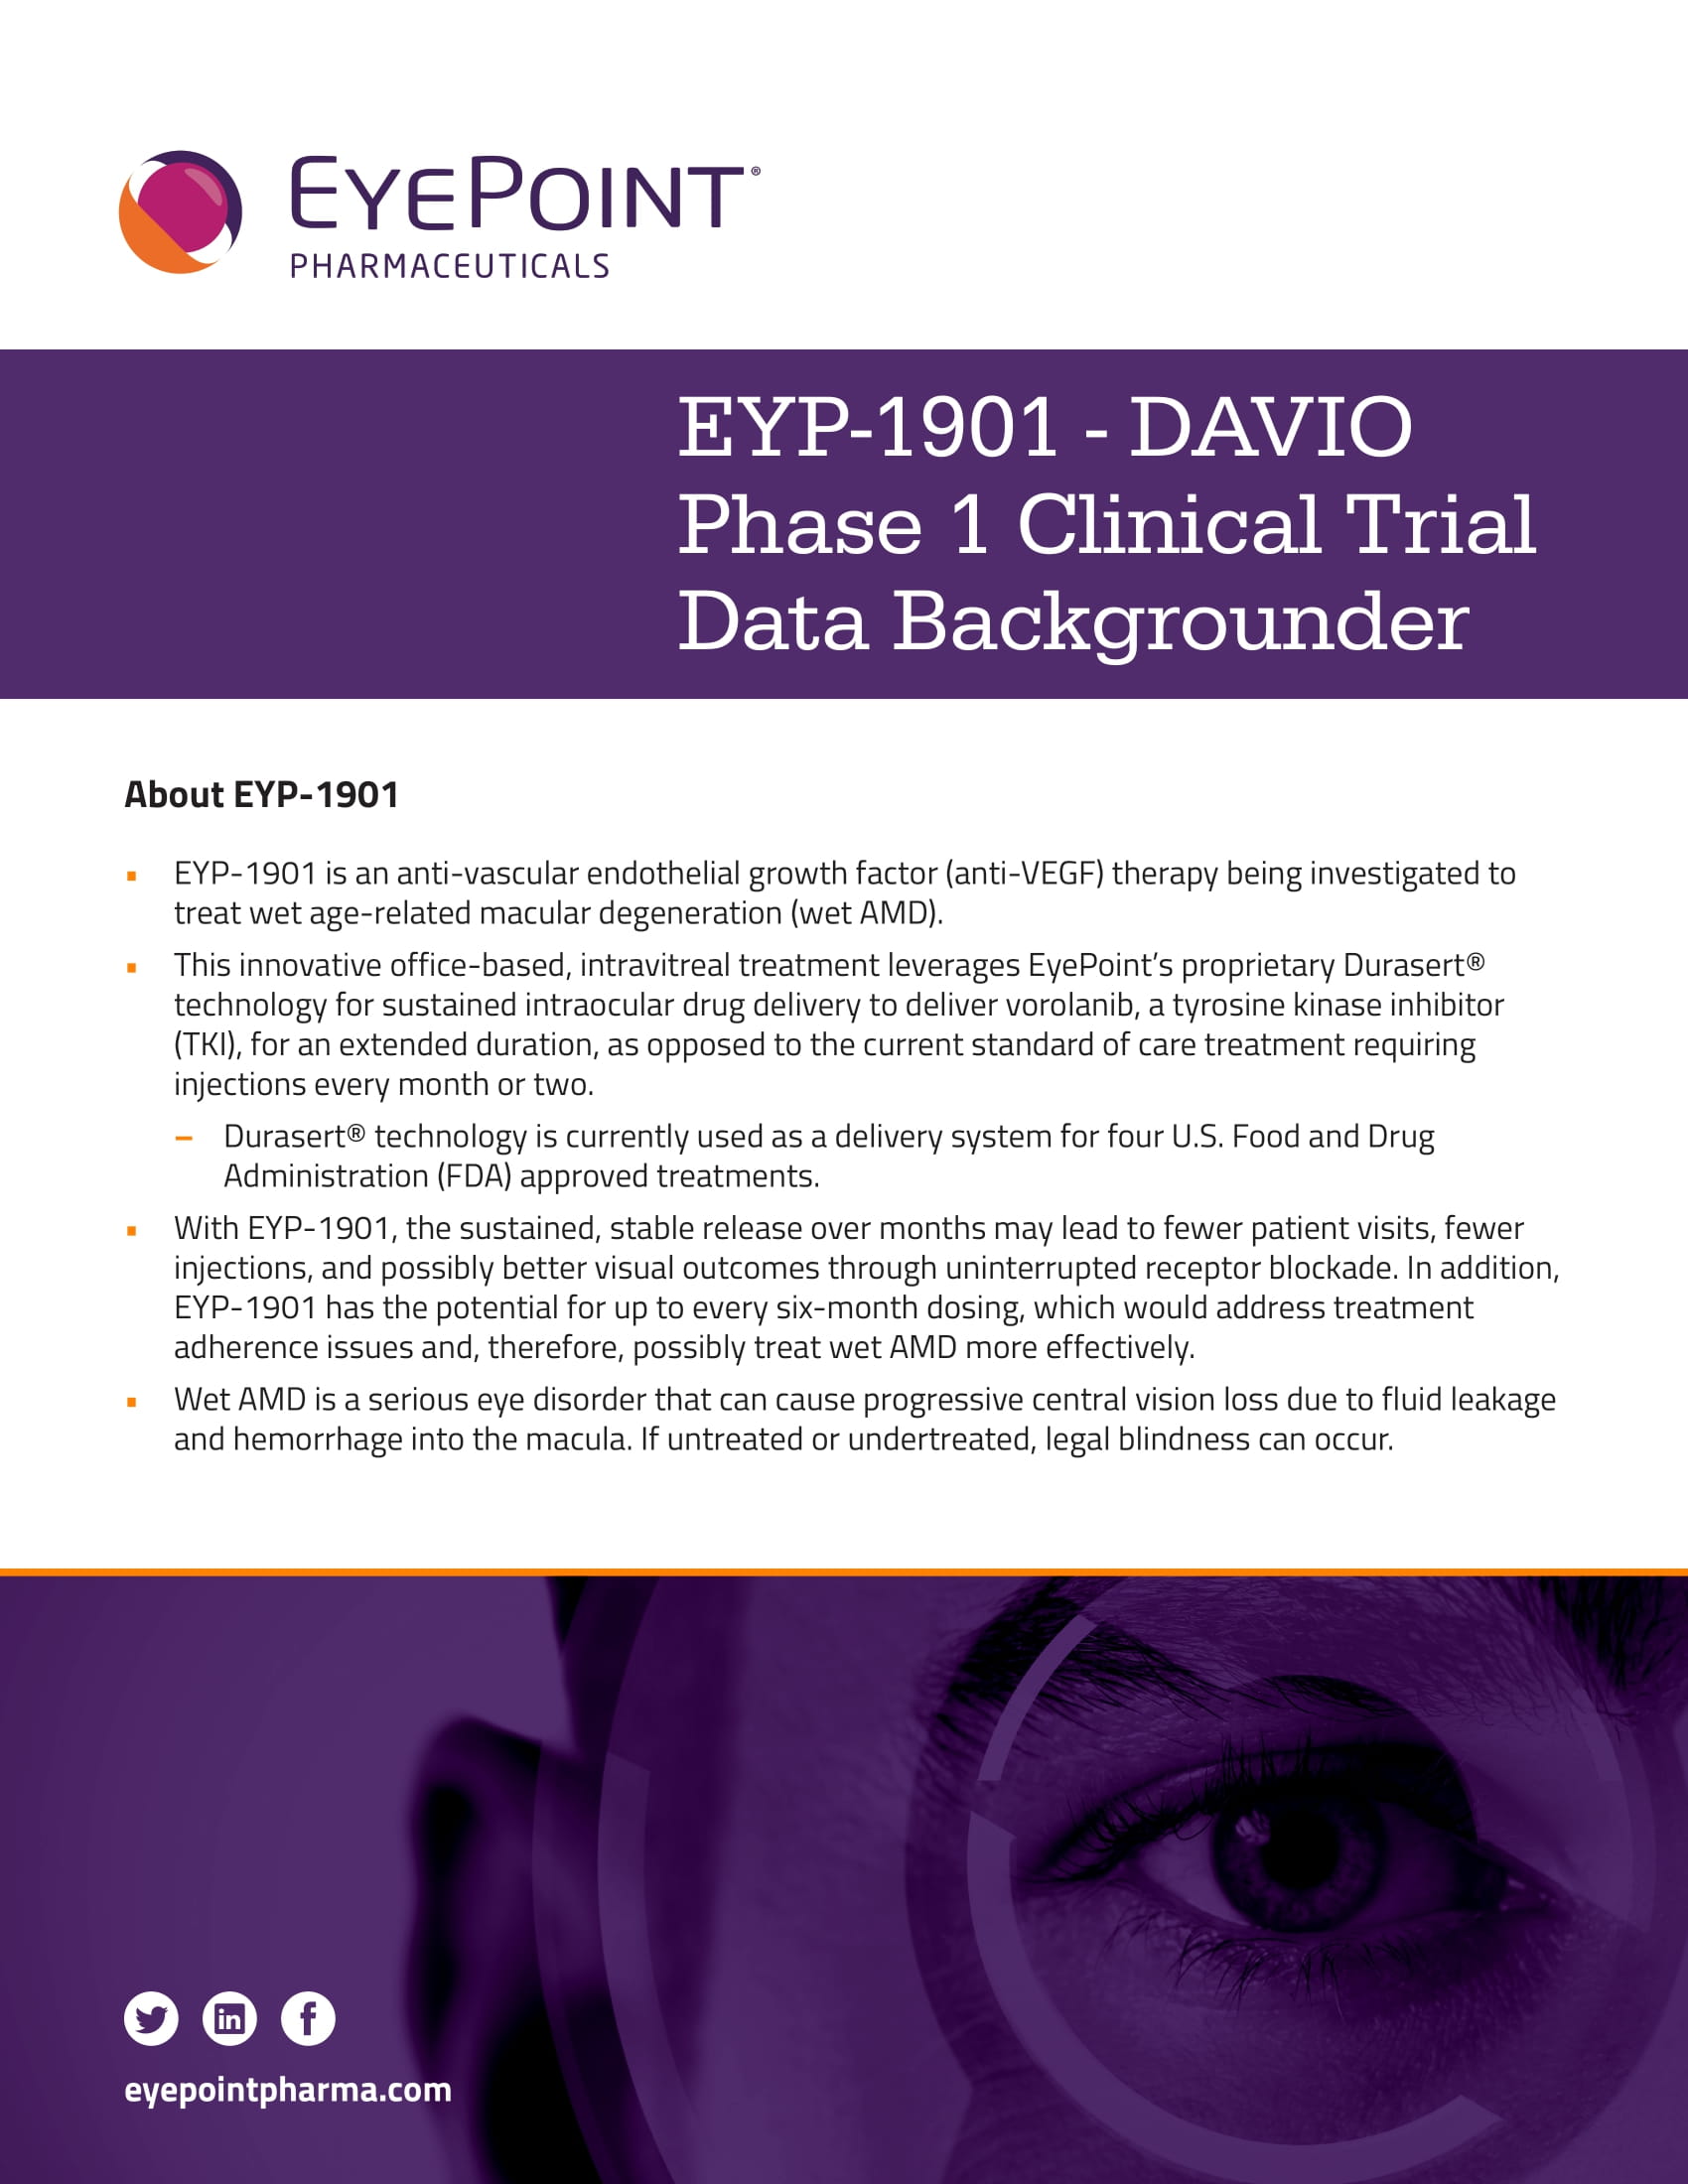 Learn more about EYP-1901 and the DAVIO trial